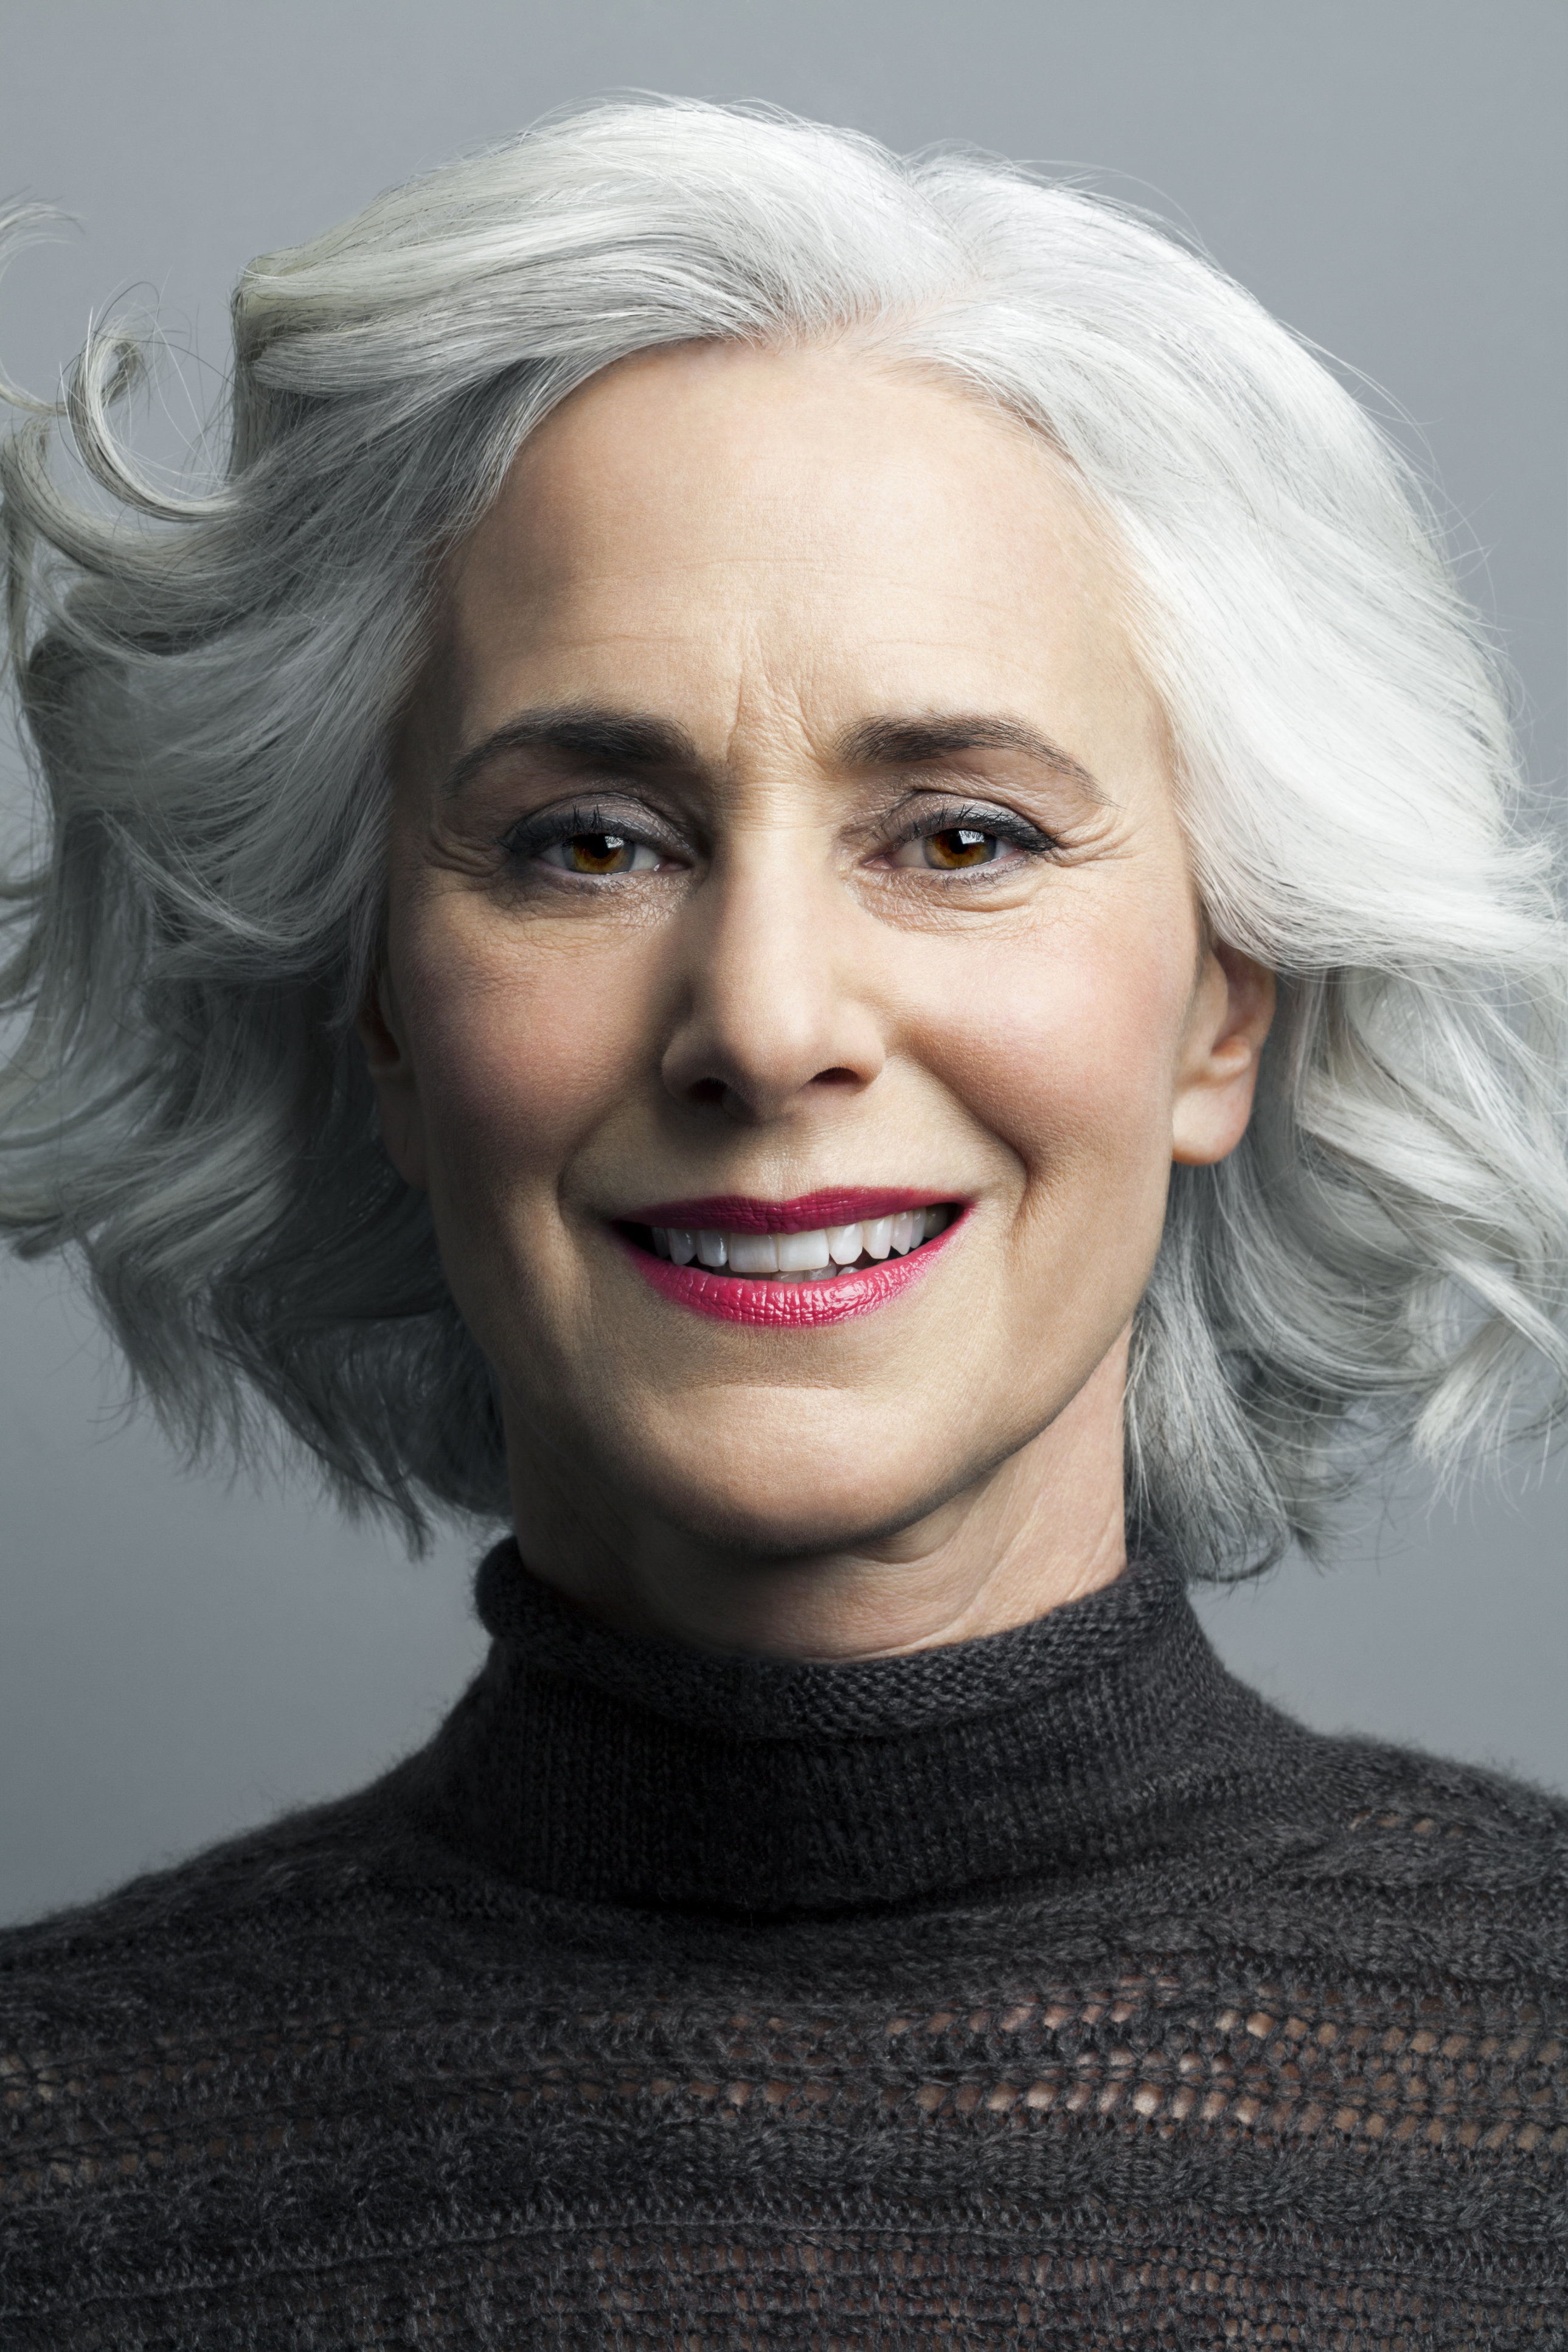 The 10 Best Hairstyles for Women Over 40